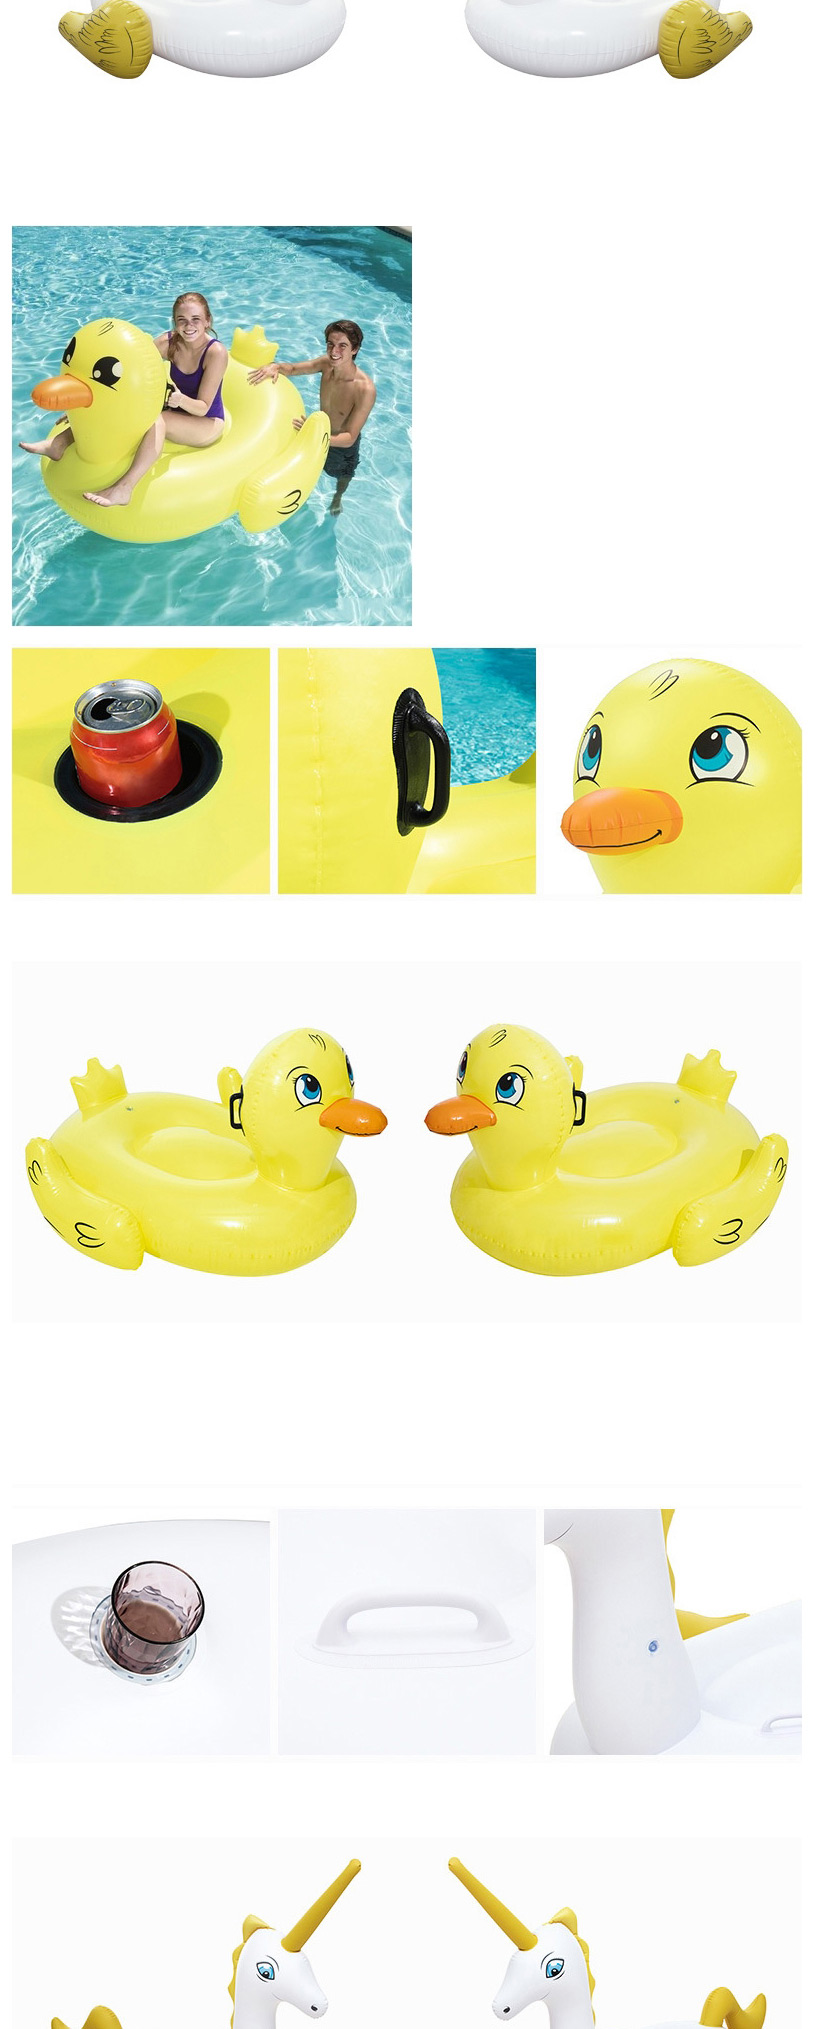 Fashion Fighter Water Gun Water Animal Inflatable Mount Toy Floating Bed,Swim Rings